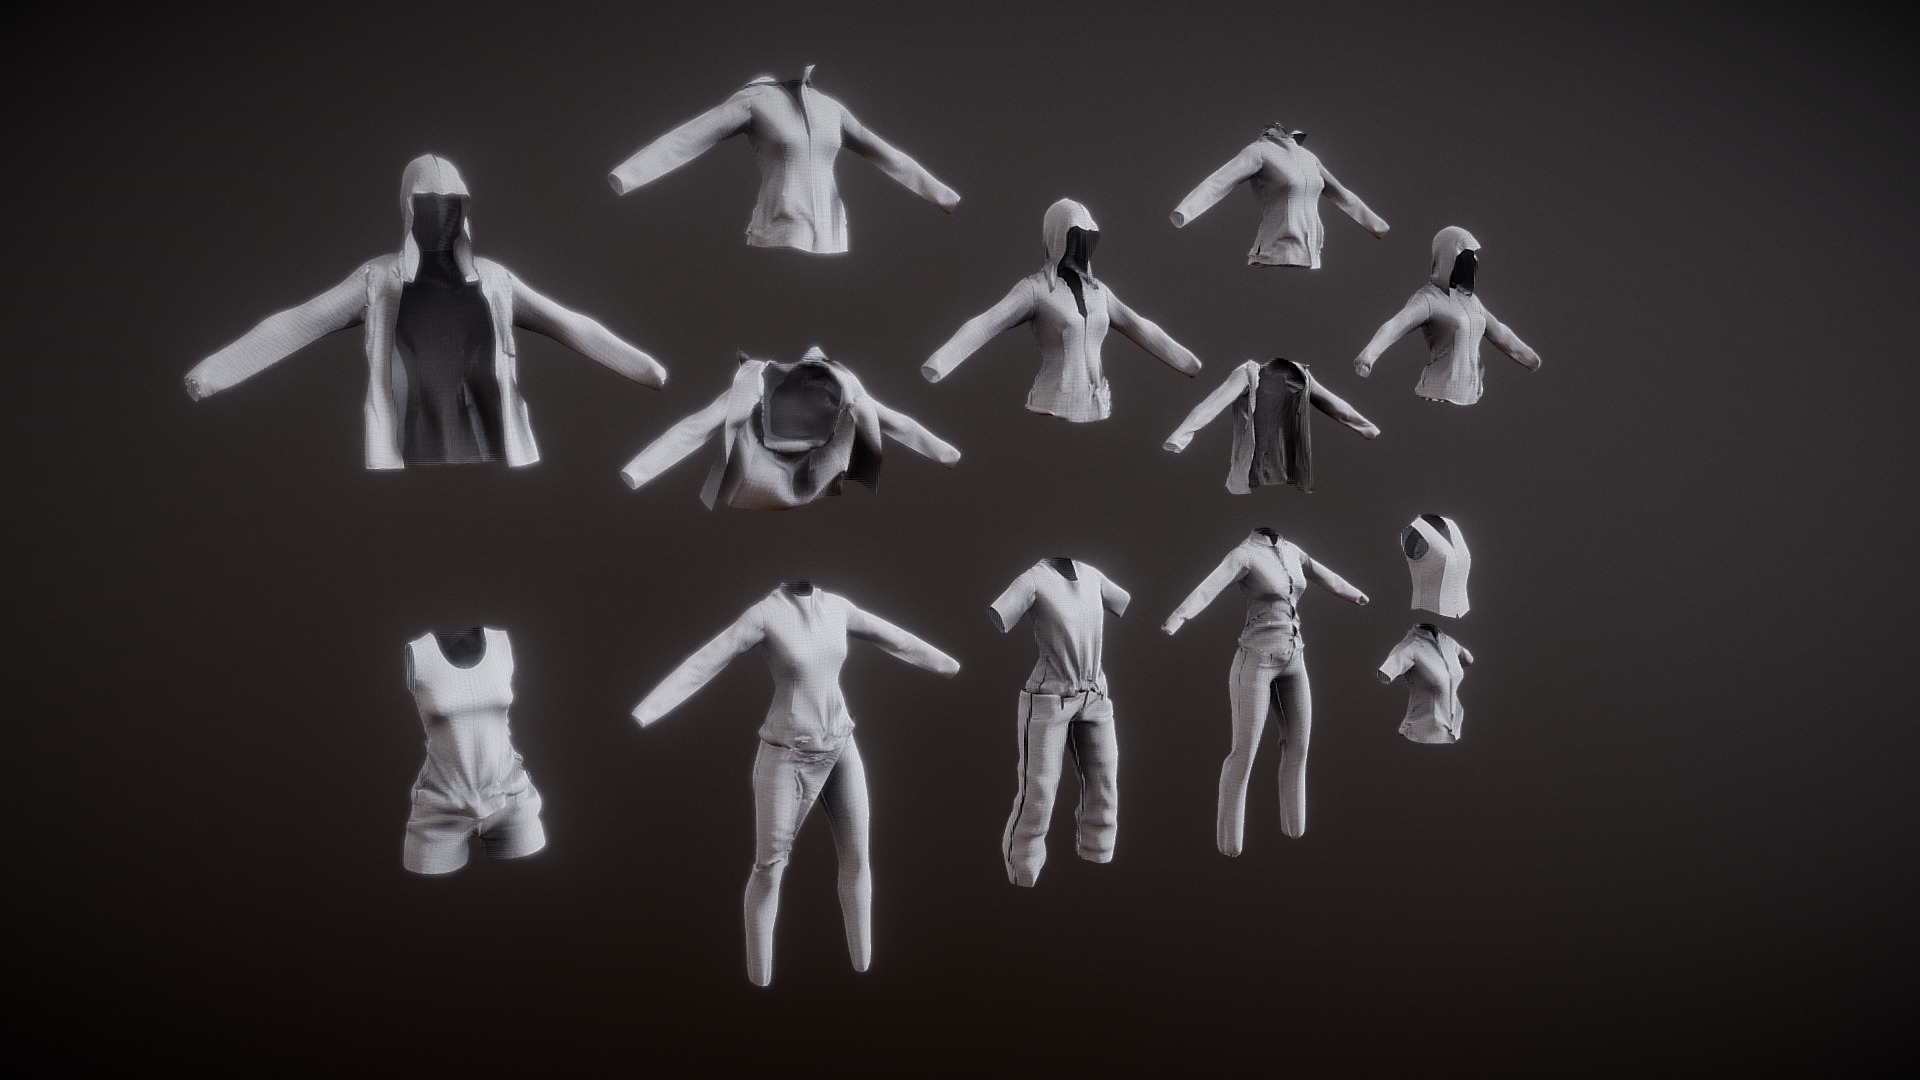 3D model Shape of Clothes For Ray II by cloth sim - This is a 3D model of the Shape of Clothes For Ray II by cloth sim. The 3D model is about a group of people in white.